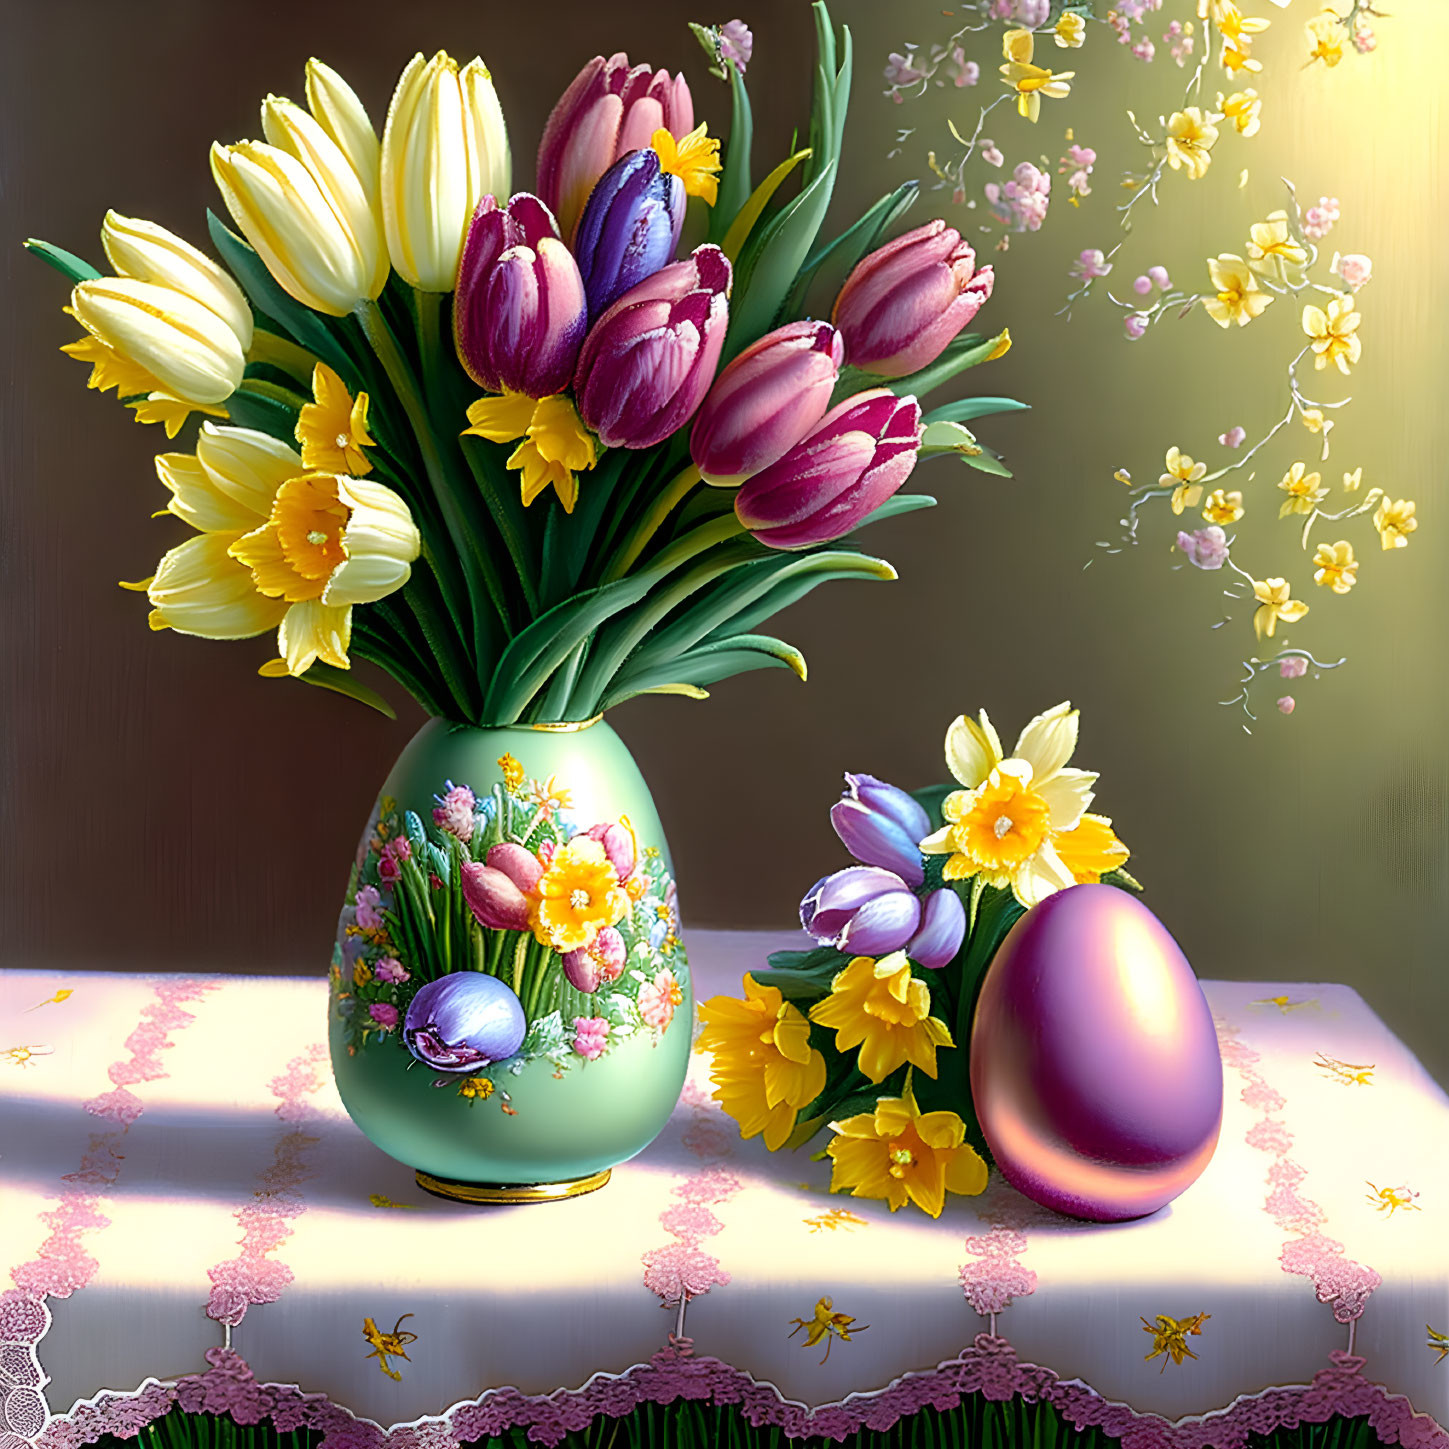 Tulips in Vase and Easter Egg